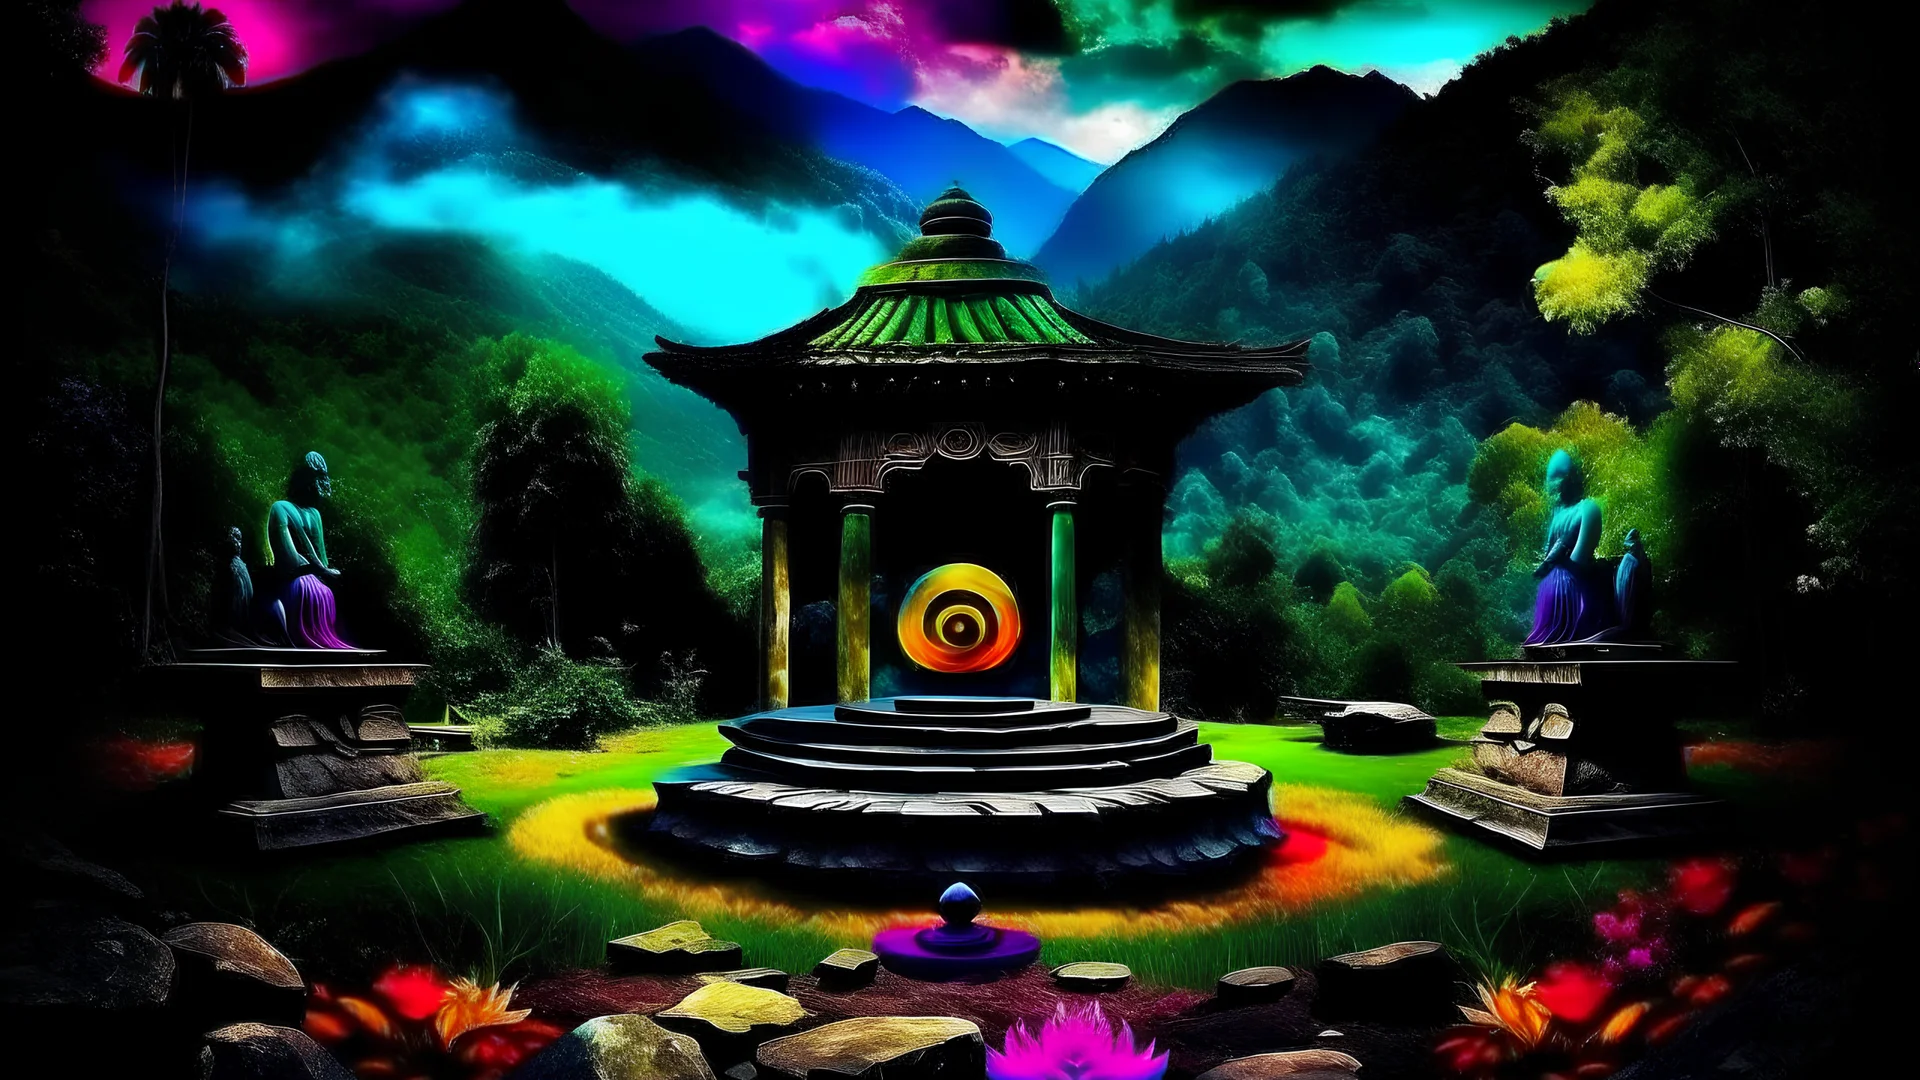 meditation round podium . my dreams . day landscape day landscape, chakra colors, In the garden my mind bows . meditation .The ruins of a village in the midst in the jungle , mountains. space color is dark , where you can see the fire and smell the smoke, galaxy, space, ethereal space, cosmos, panorama. Palace , Background: An otherworldly planet, bathed in the cold glow of distant stars. Northern Lights dancing above the clouds in papua new guinea.